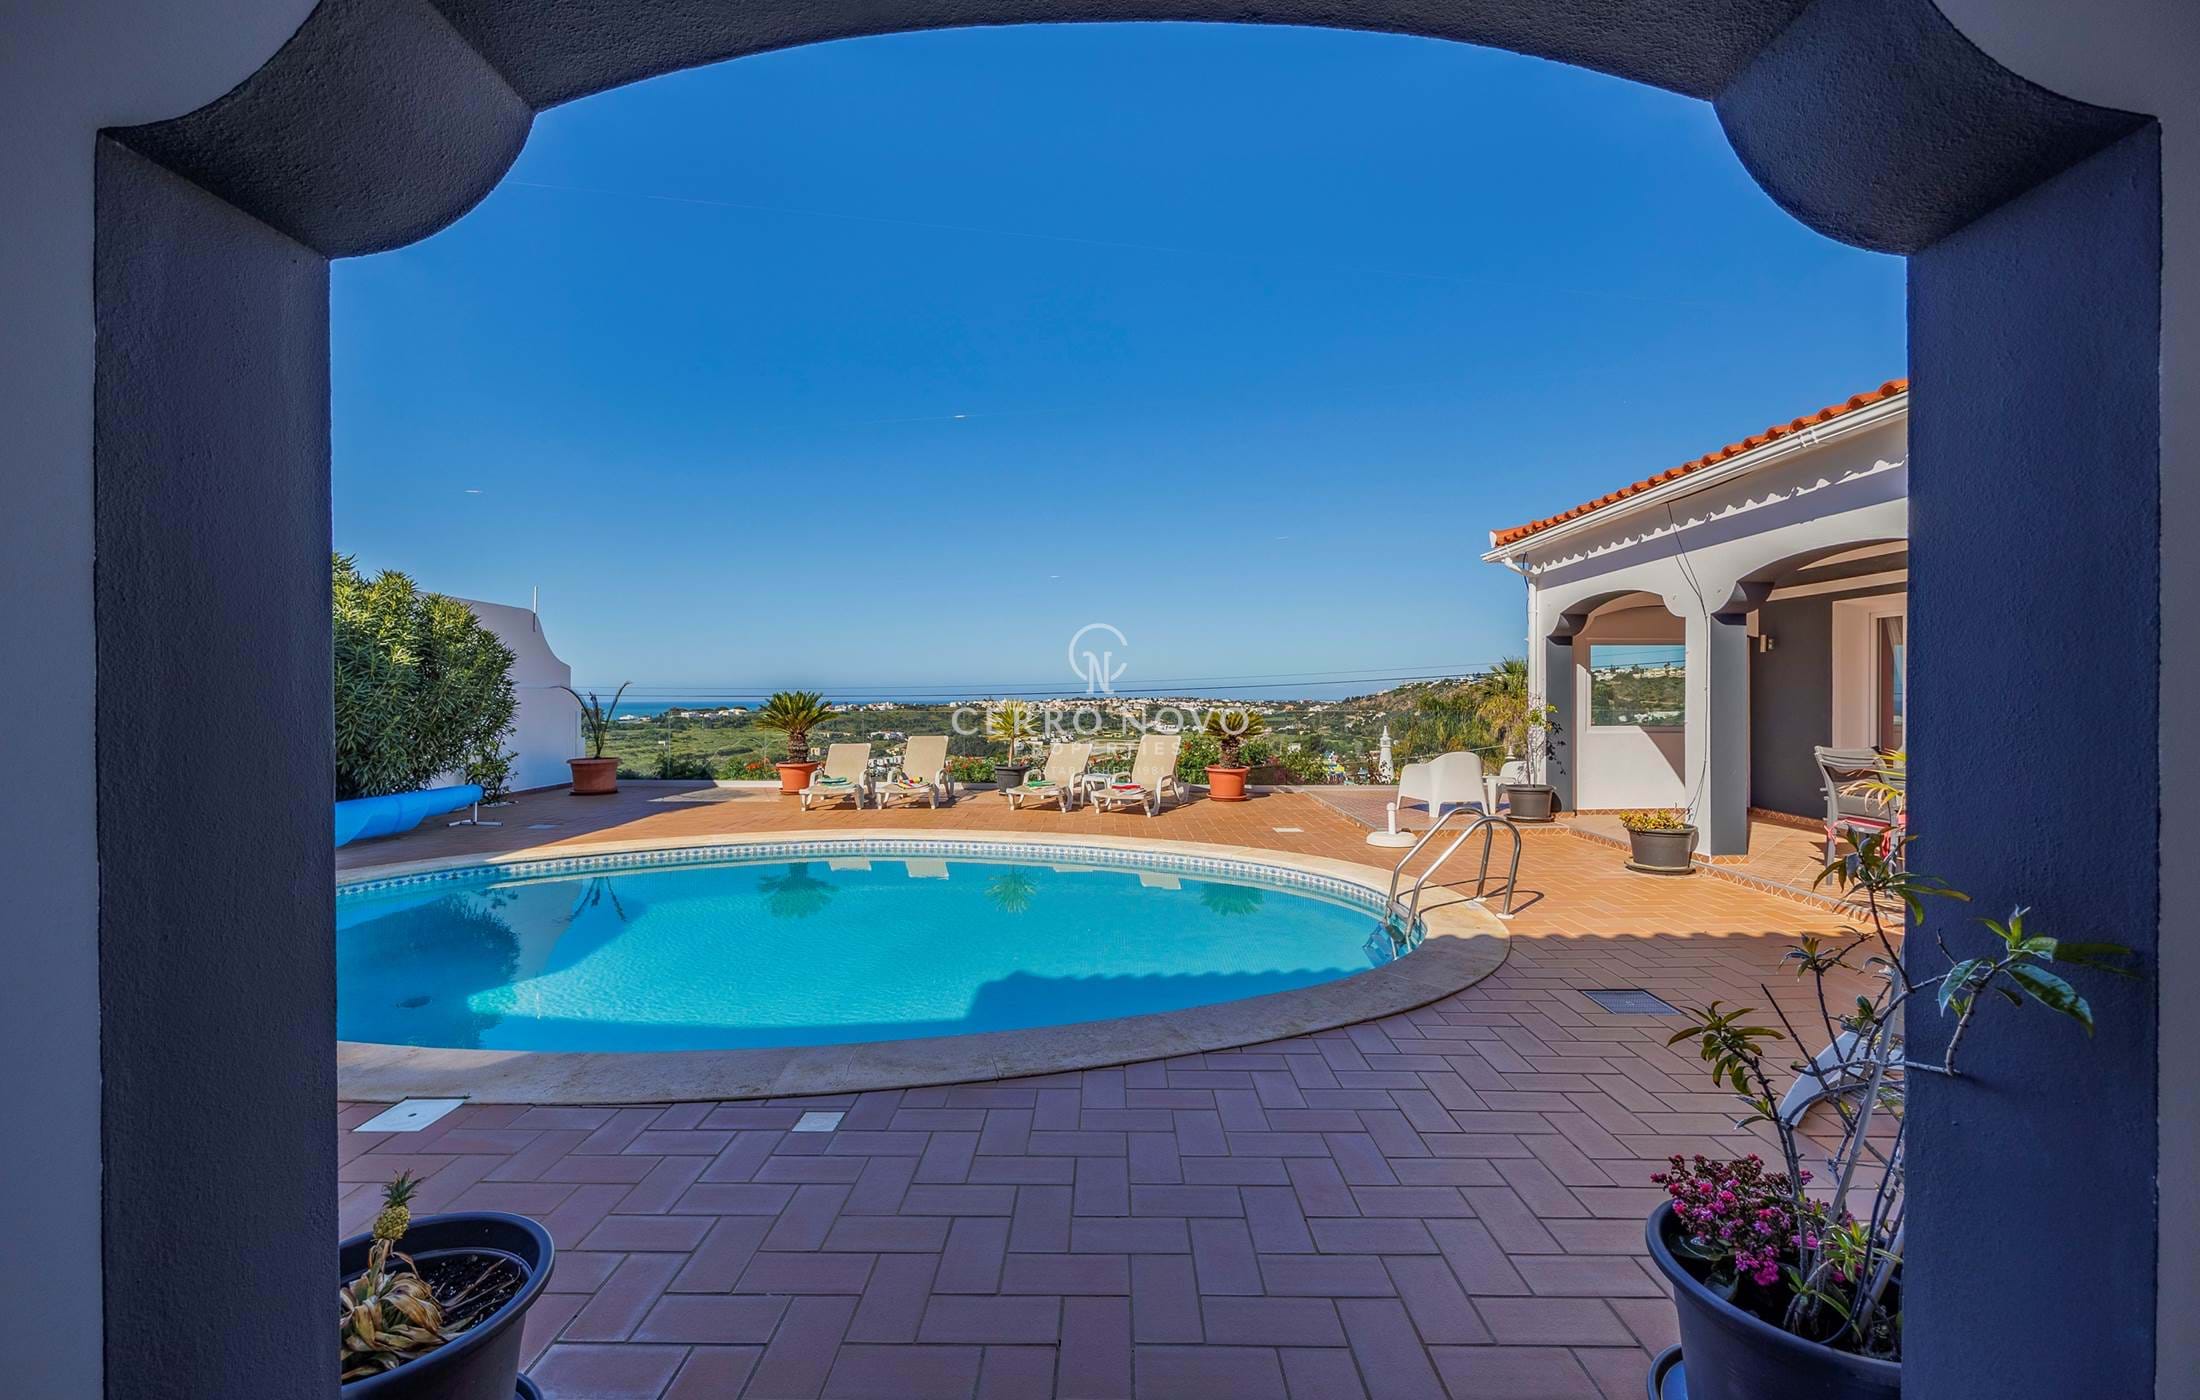 Amazing four bedroom villa with pool and views over the marina